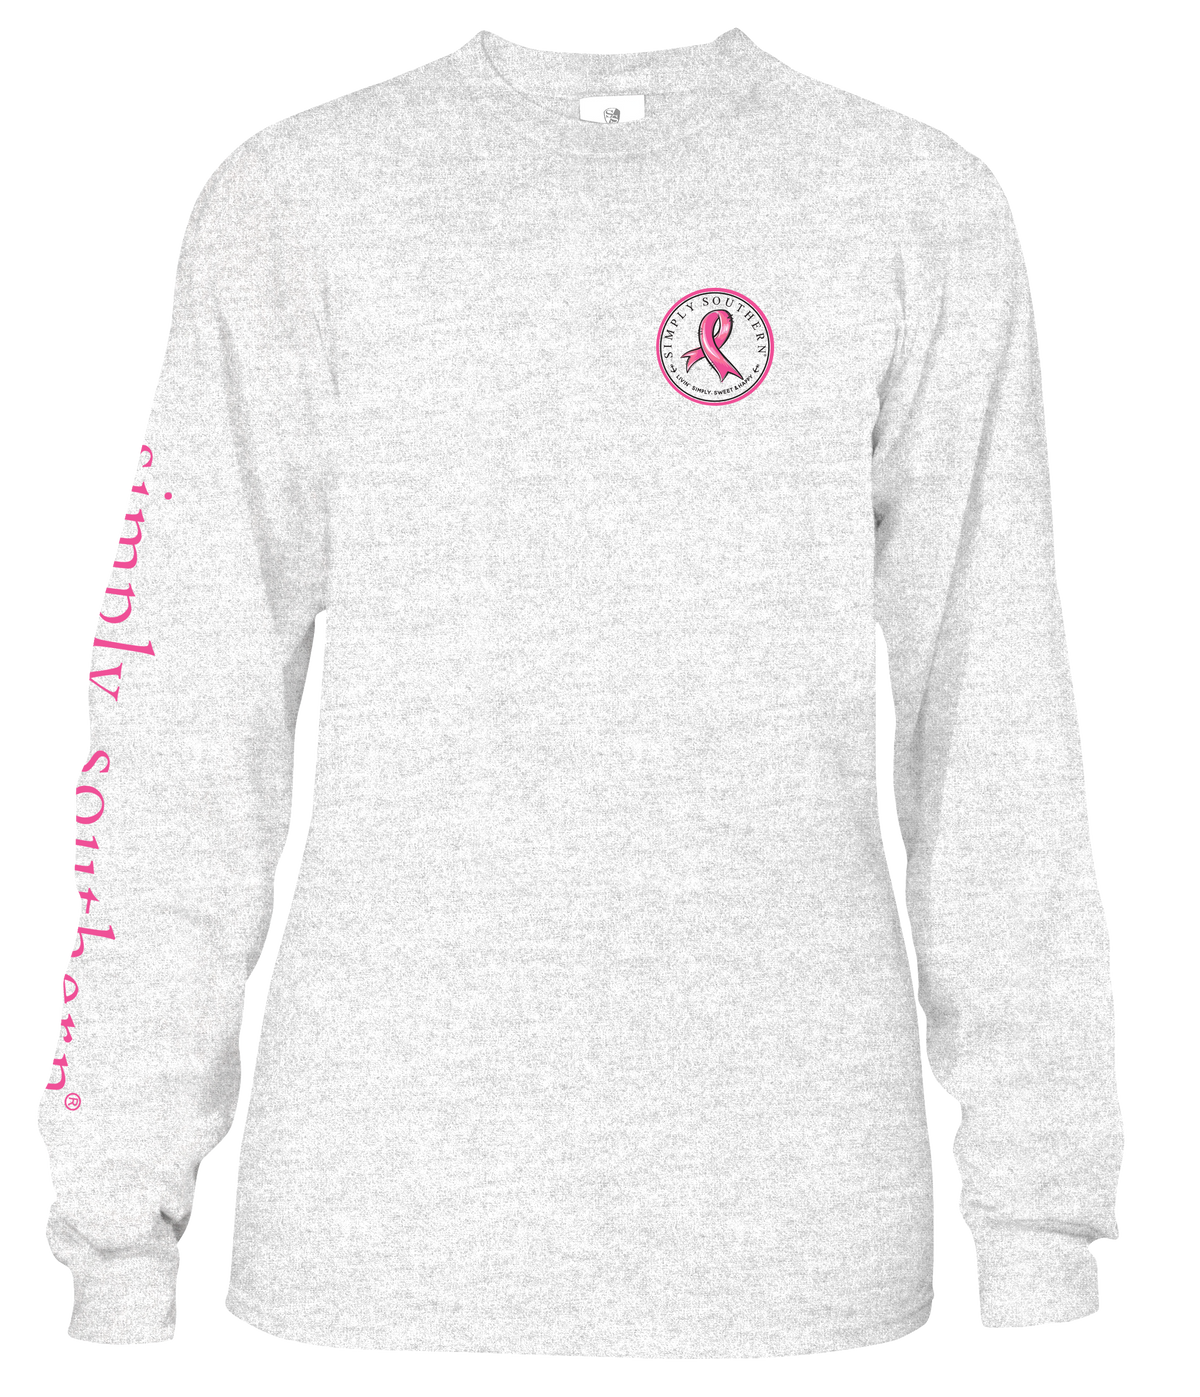 SIMPLY SOUTHERN GNOME CURE CANCER LONG SLEEVE SHIRT